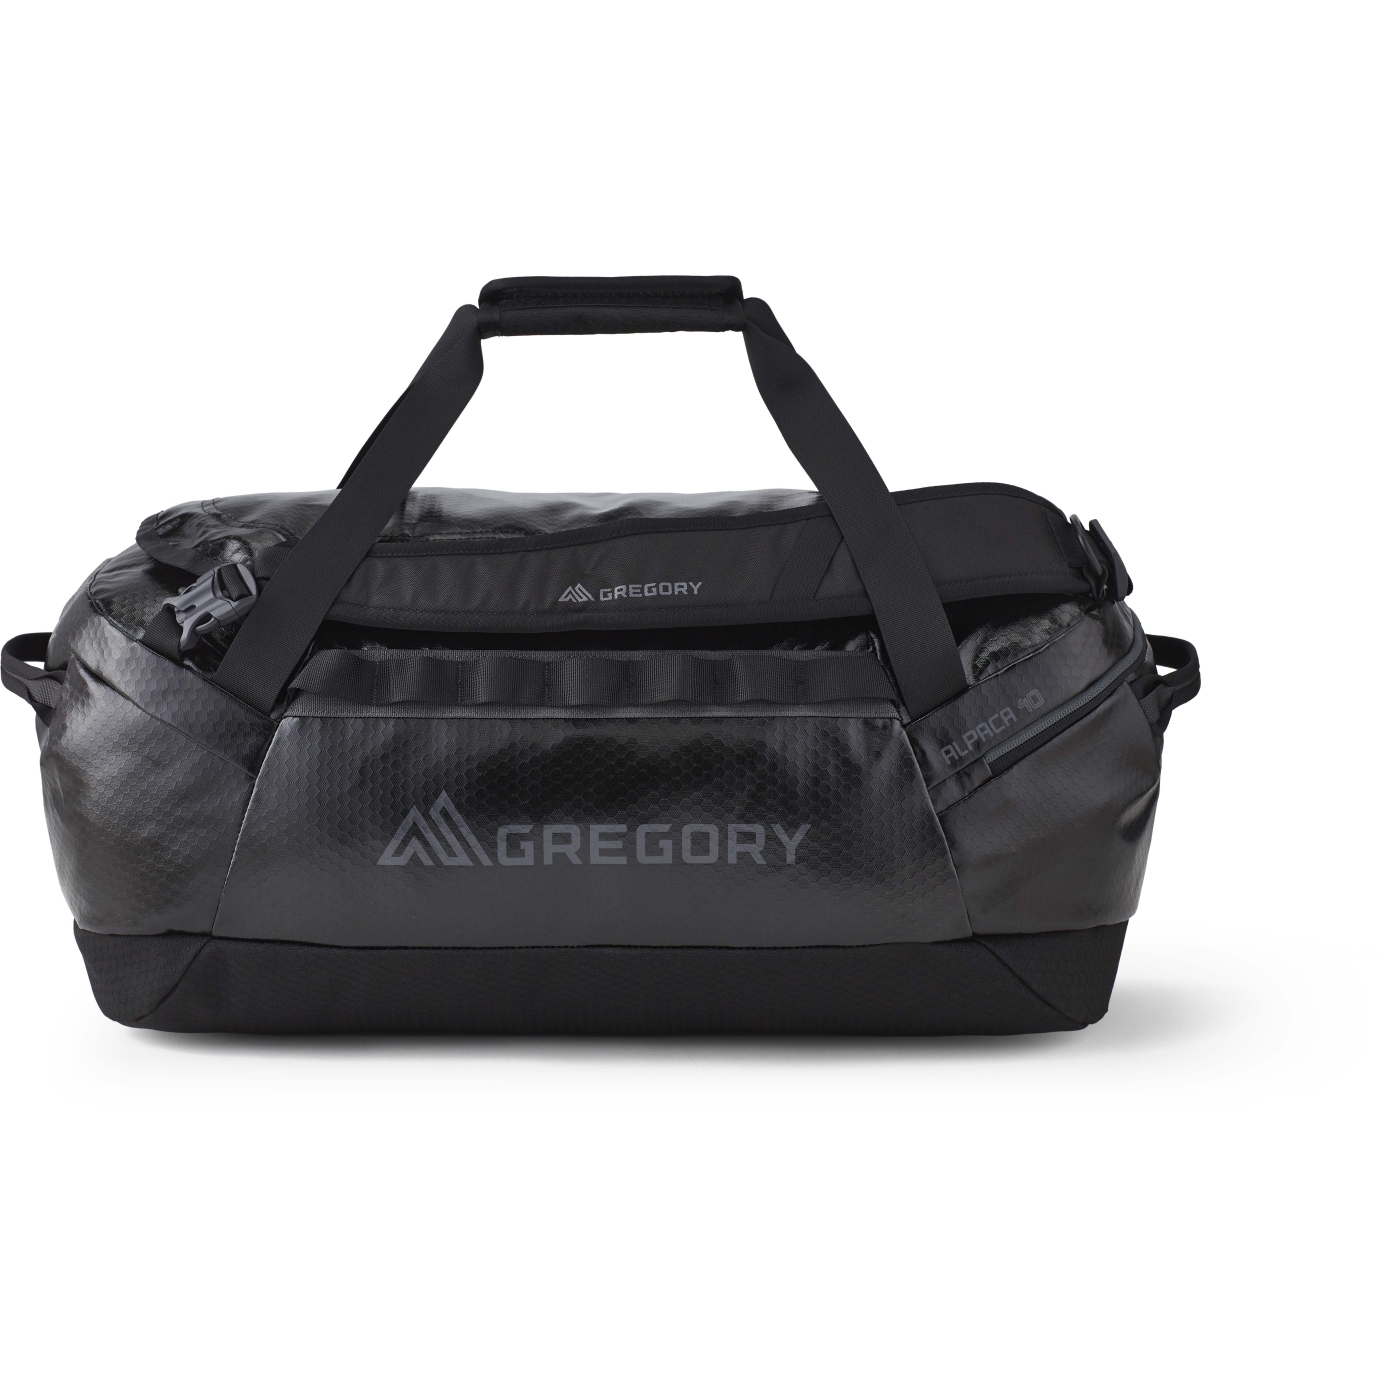 Picture of Gregory Alpaca 40 Travel Bag - Obsidian Black